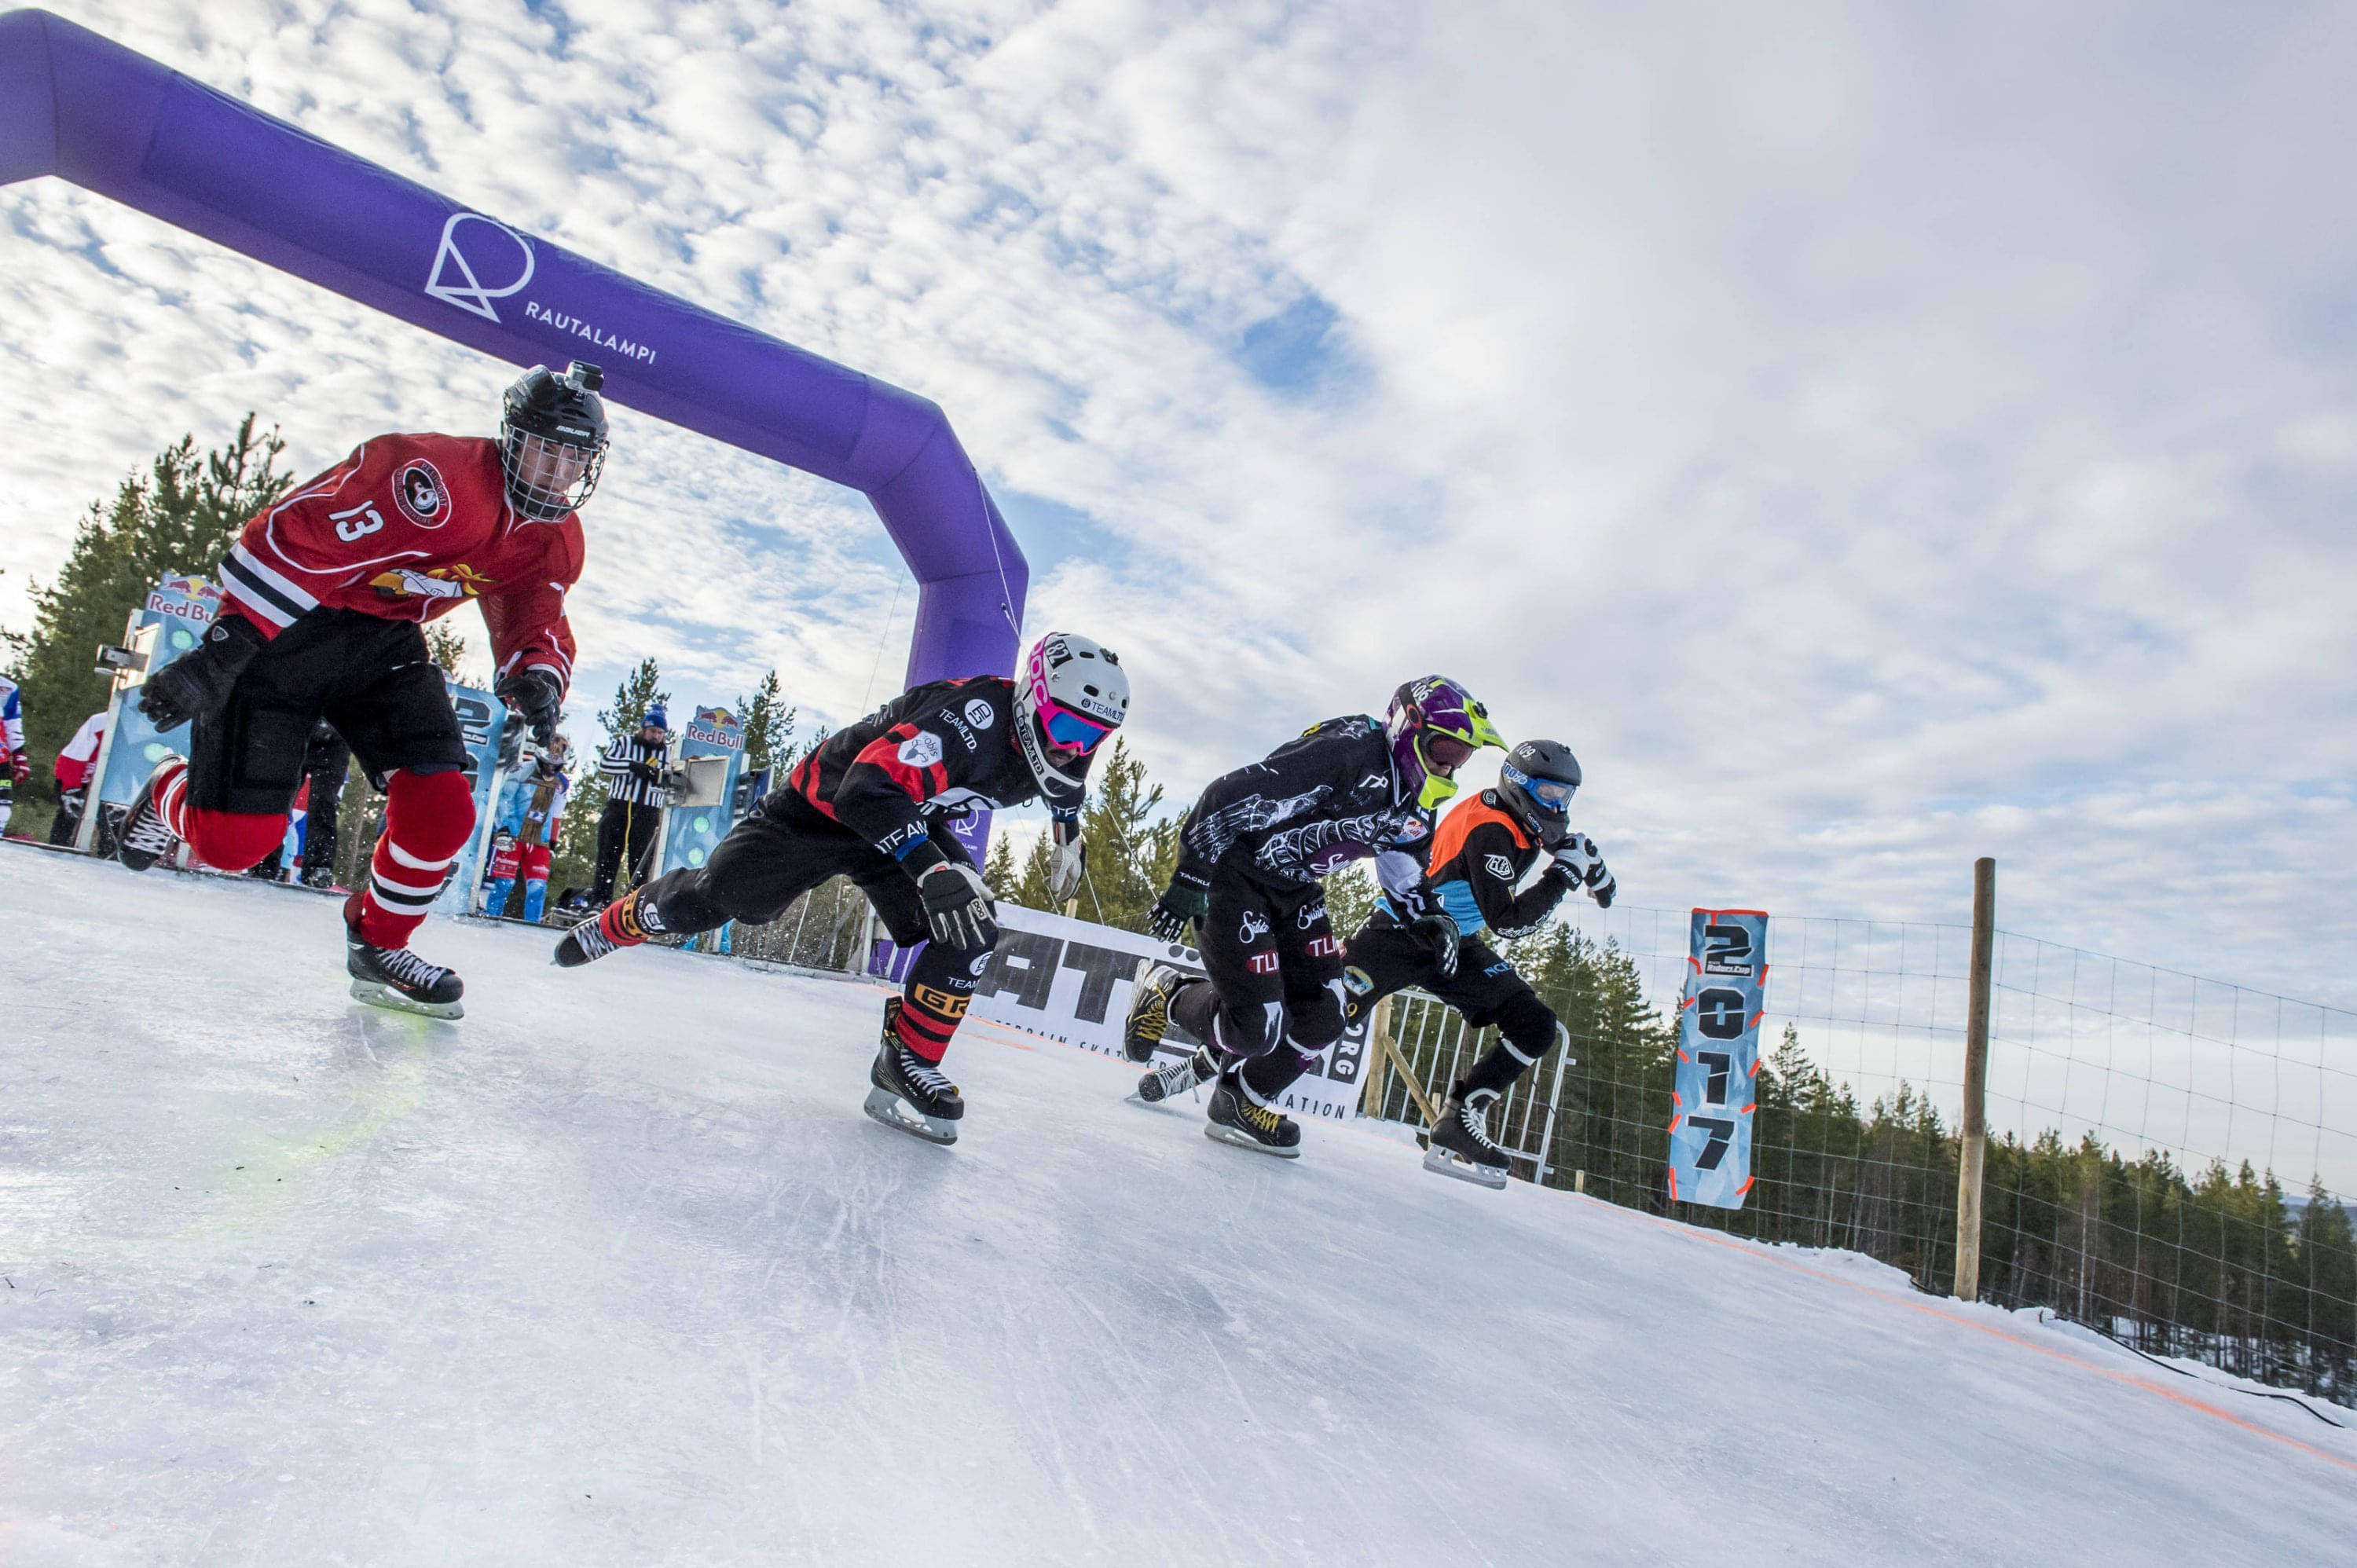 Competitors are looking forward to the Rautalampi event this weekend. Image: Mark Roe / Red Bull Content Pool